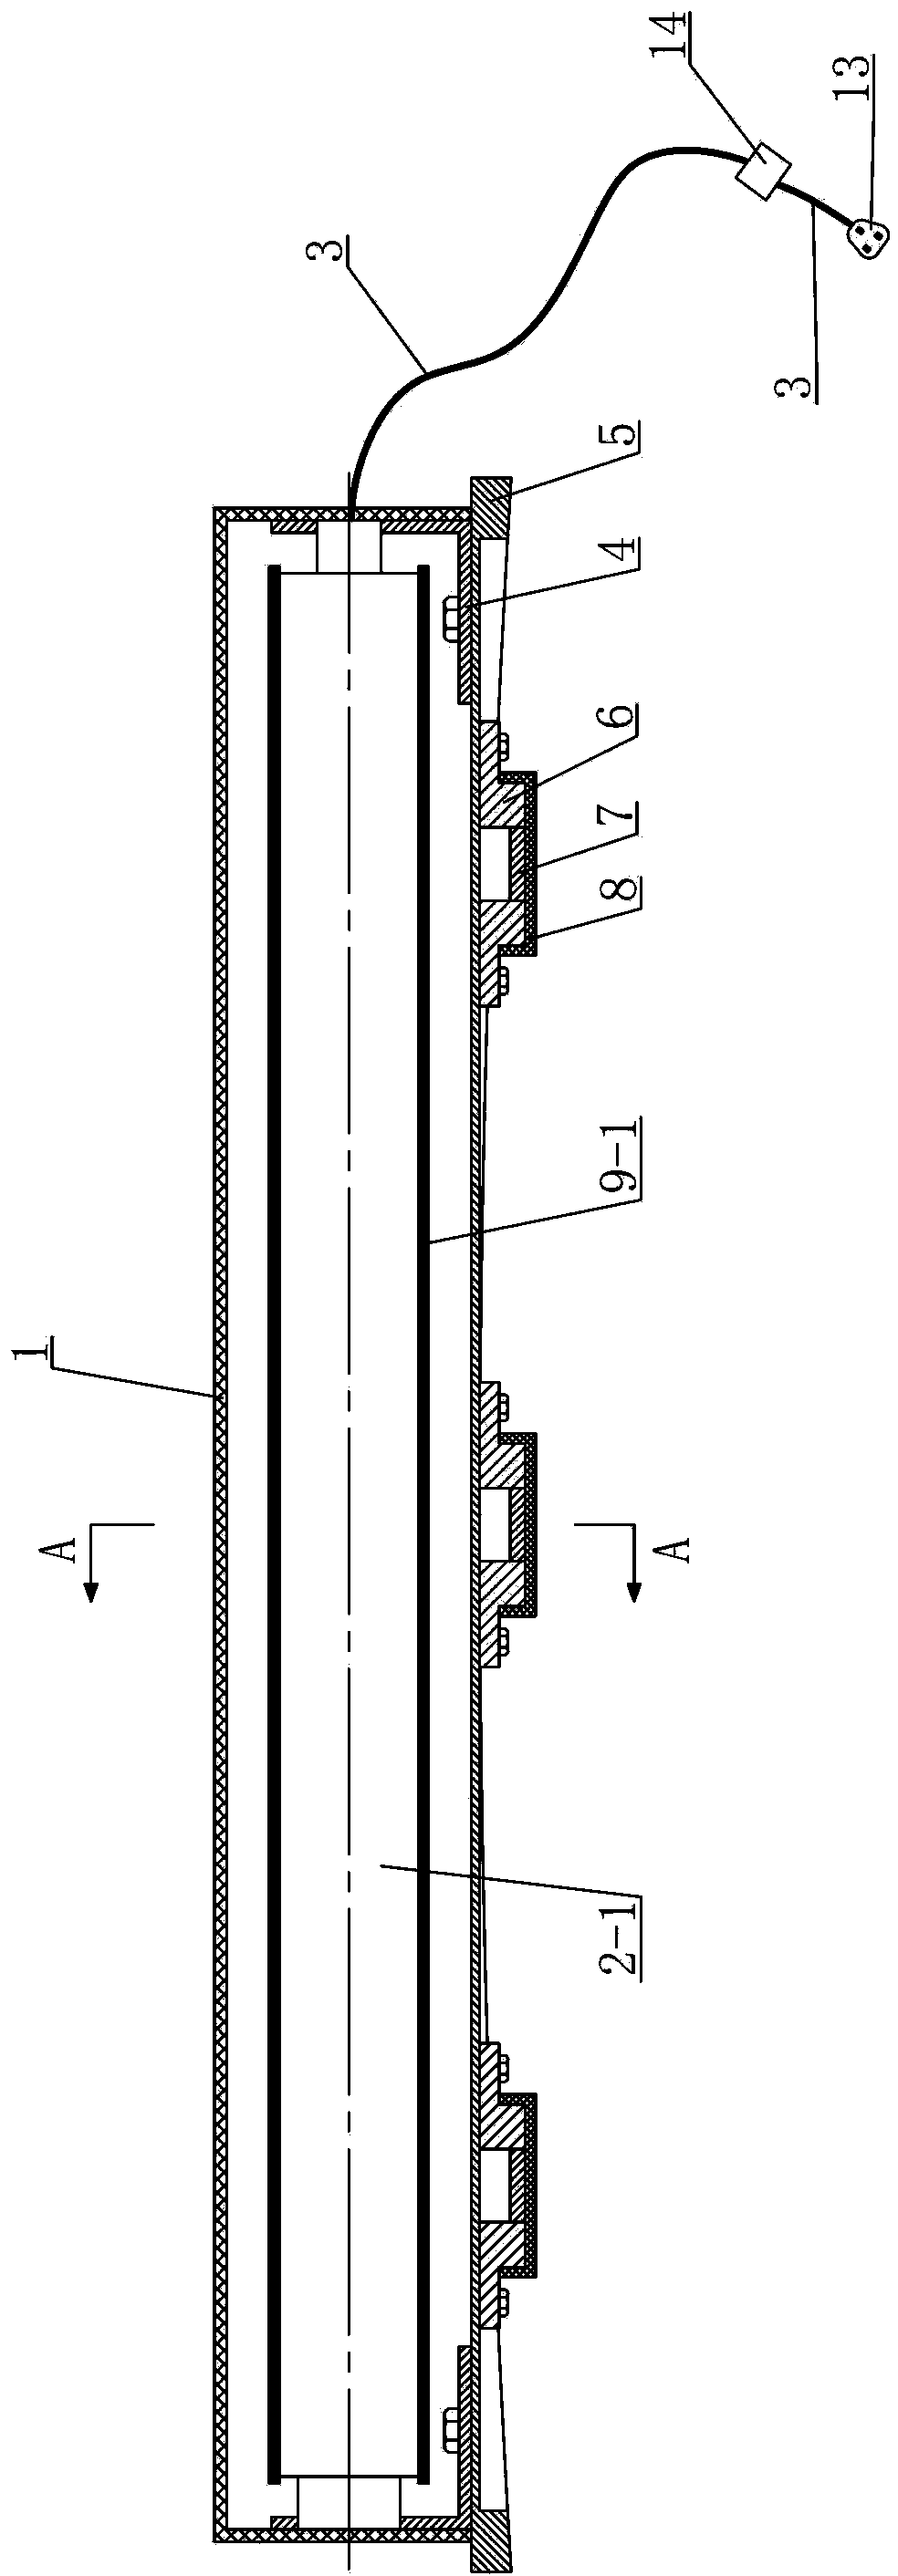 Automotive sunshade roof with crease-resistant folded fabrics and method for manufacturing same